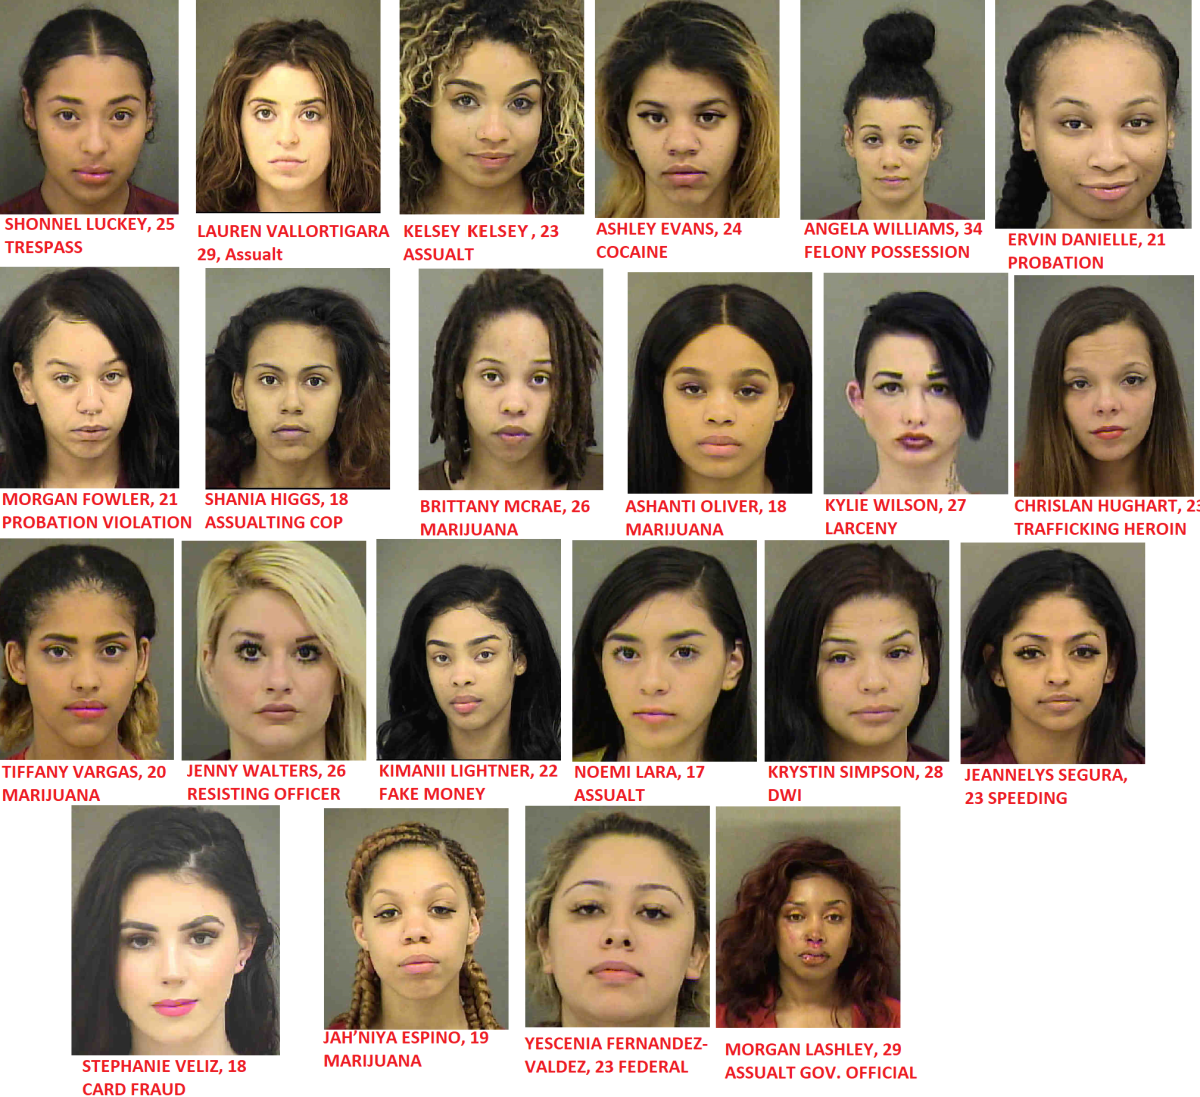 Check out some past arrests of pretty women that were in the jail